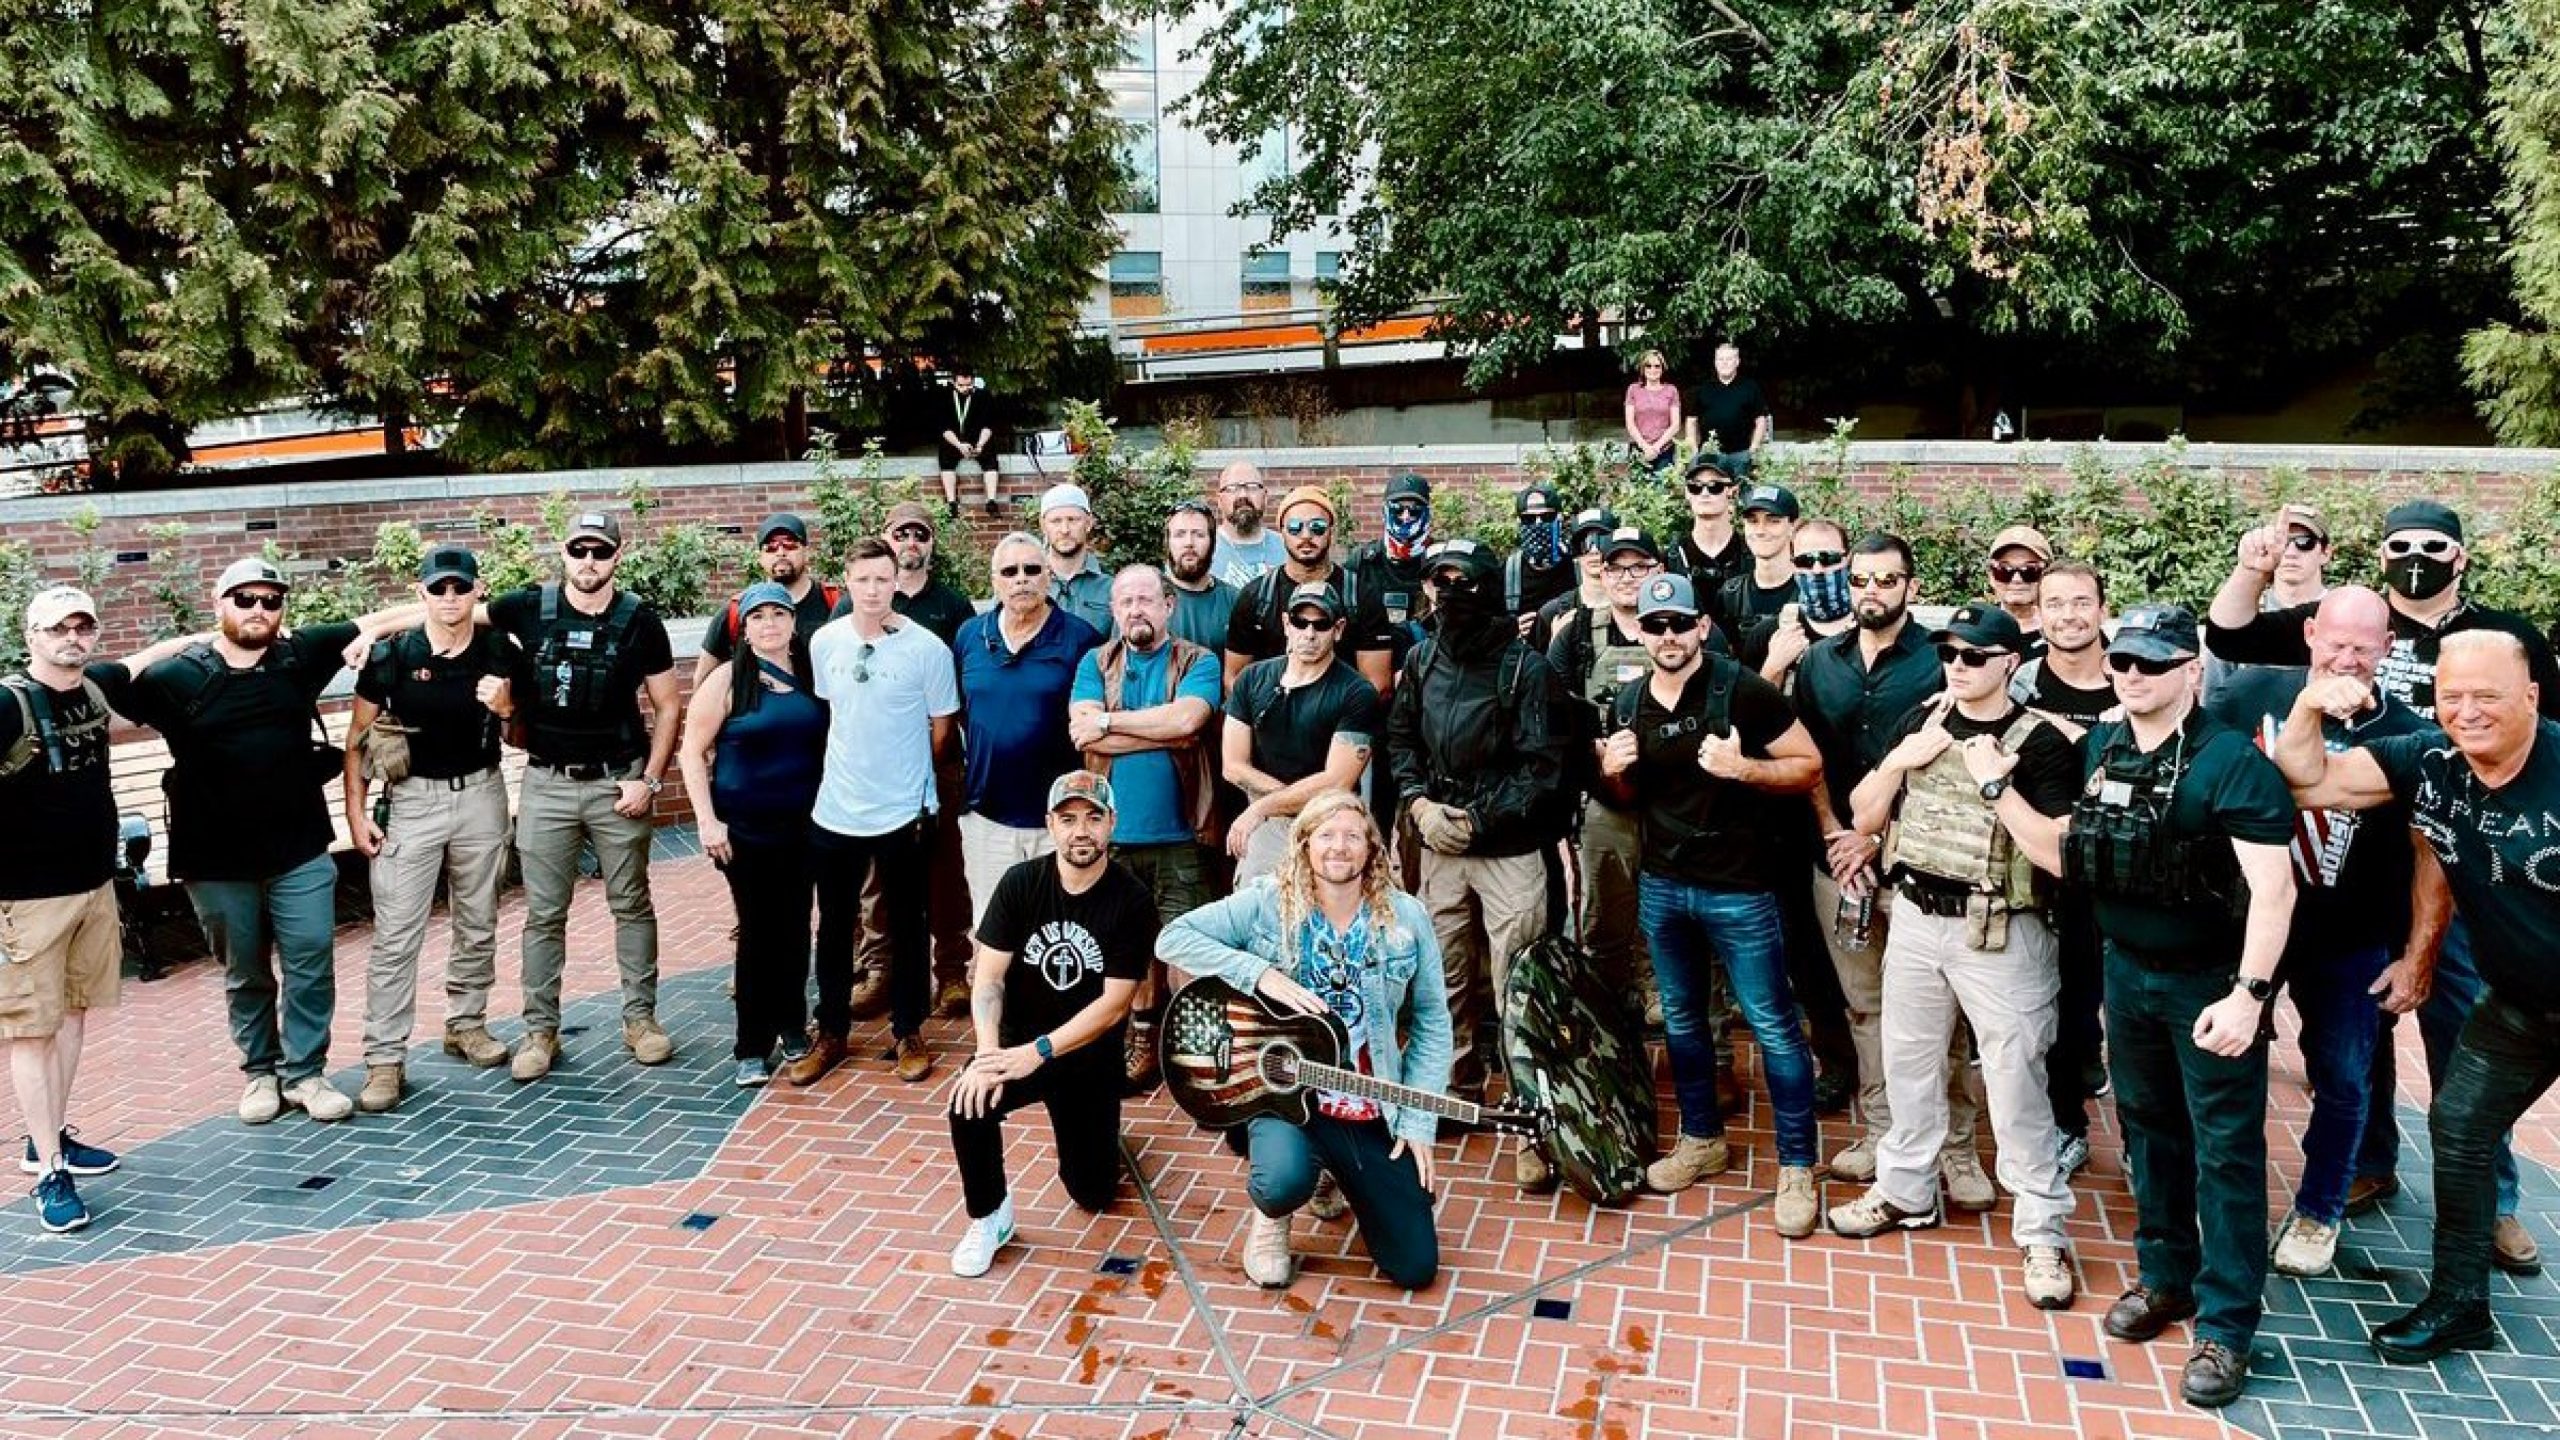 Hate watch groups voice alarm about Sean Feucht’s Portland security volunteers